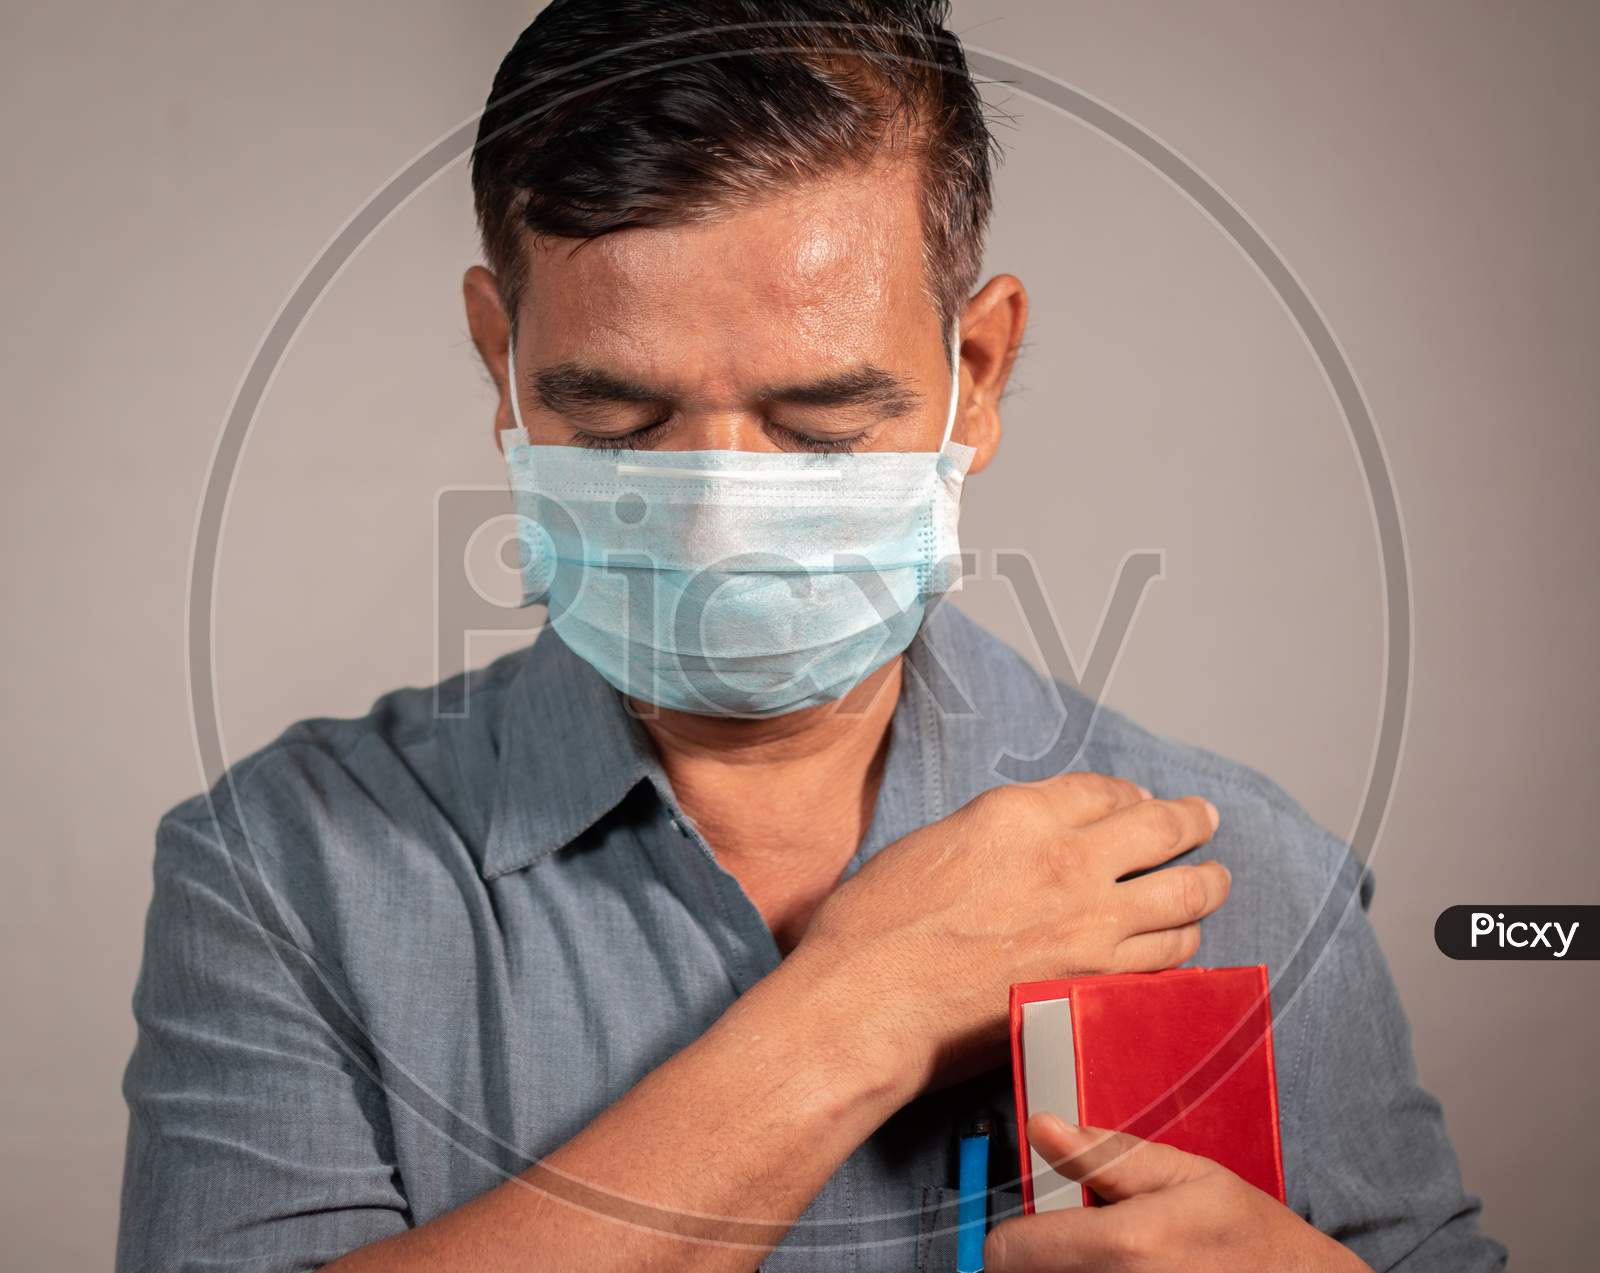 50'S Man Holding Bible And Praying God With Medical Face Mask Wearing To Protect From Covid-19 Or Coronavirus Pandemic - Concept Of Hope, Peace During Tough Quarantine Times.